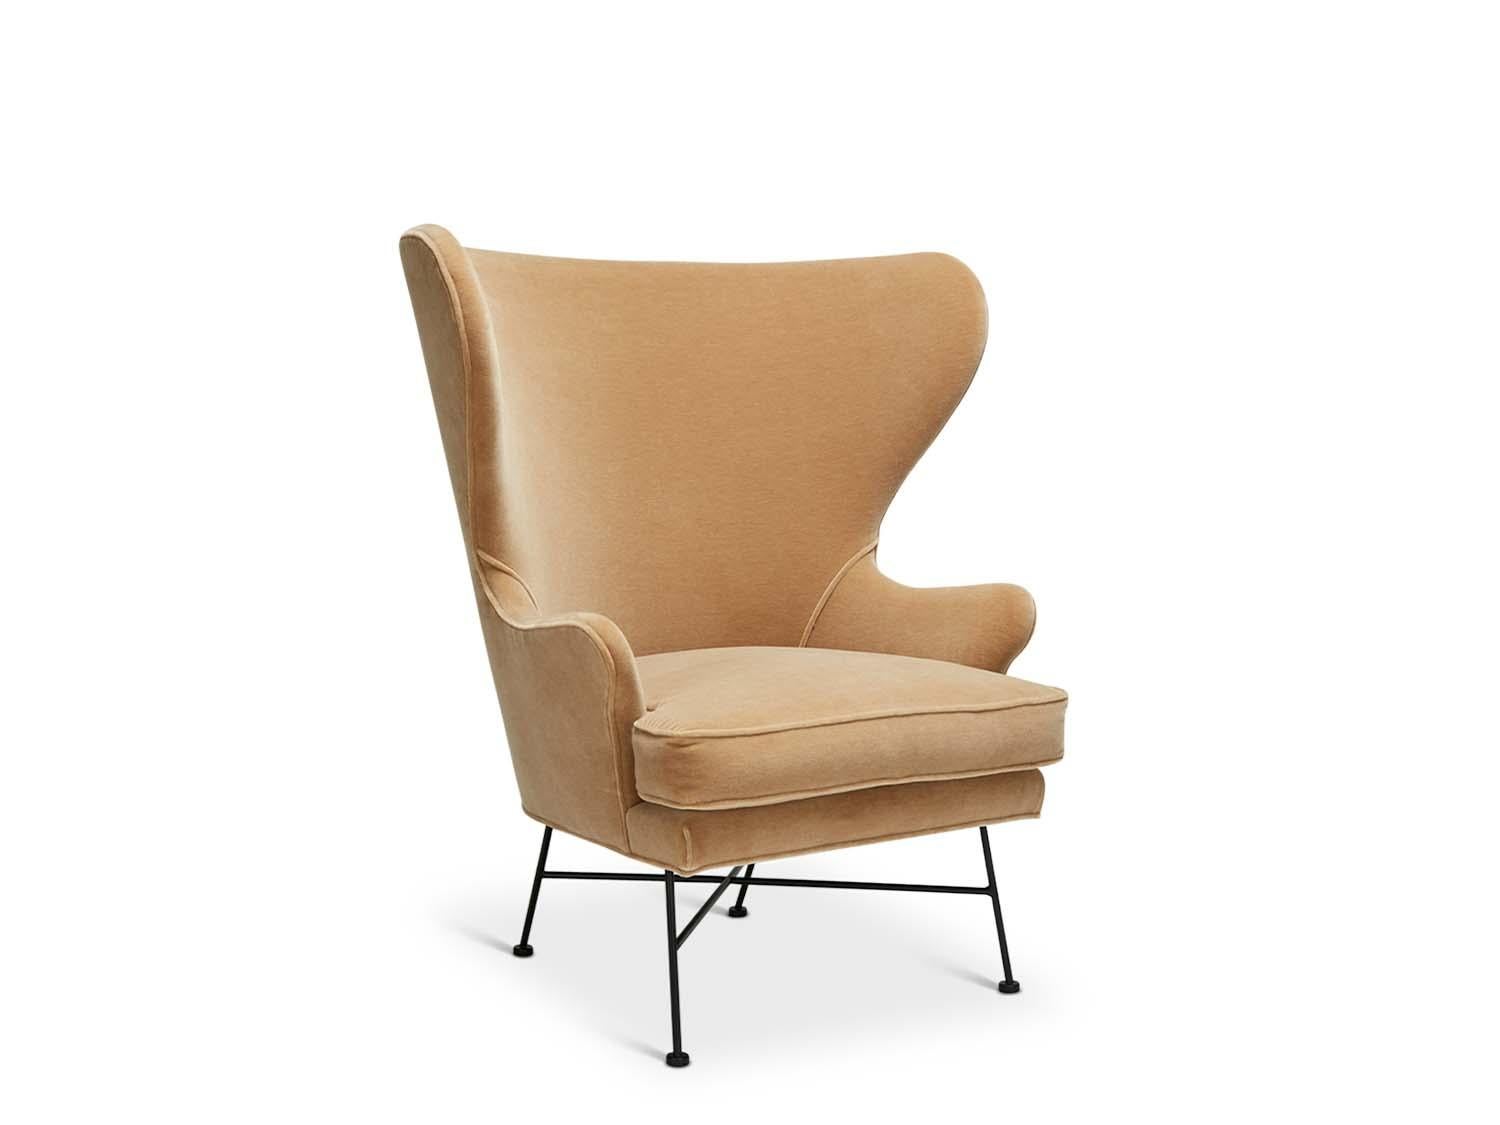 The highland wingback chair is a sculptural, wide-scale chair with a minimal metal base and down-wrapped seat cushion.

 The Lawson-Fenning Collection is designed and handmade in Los Angeles, California. Reach out to discover what options are